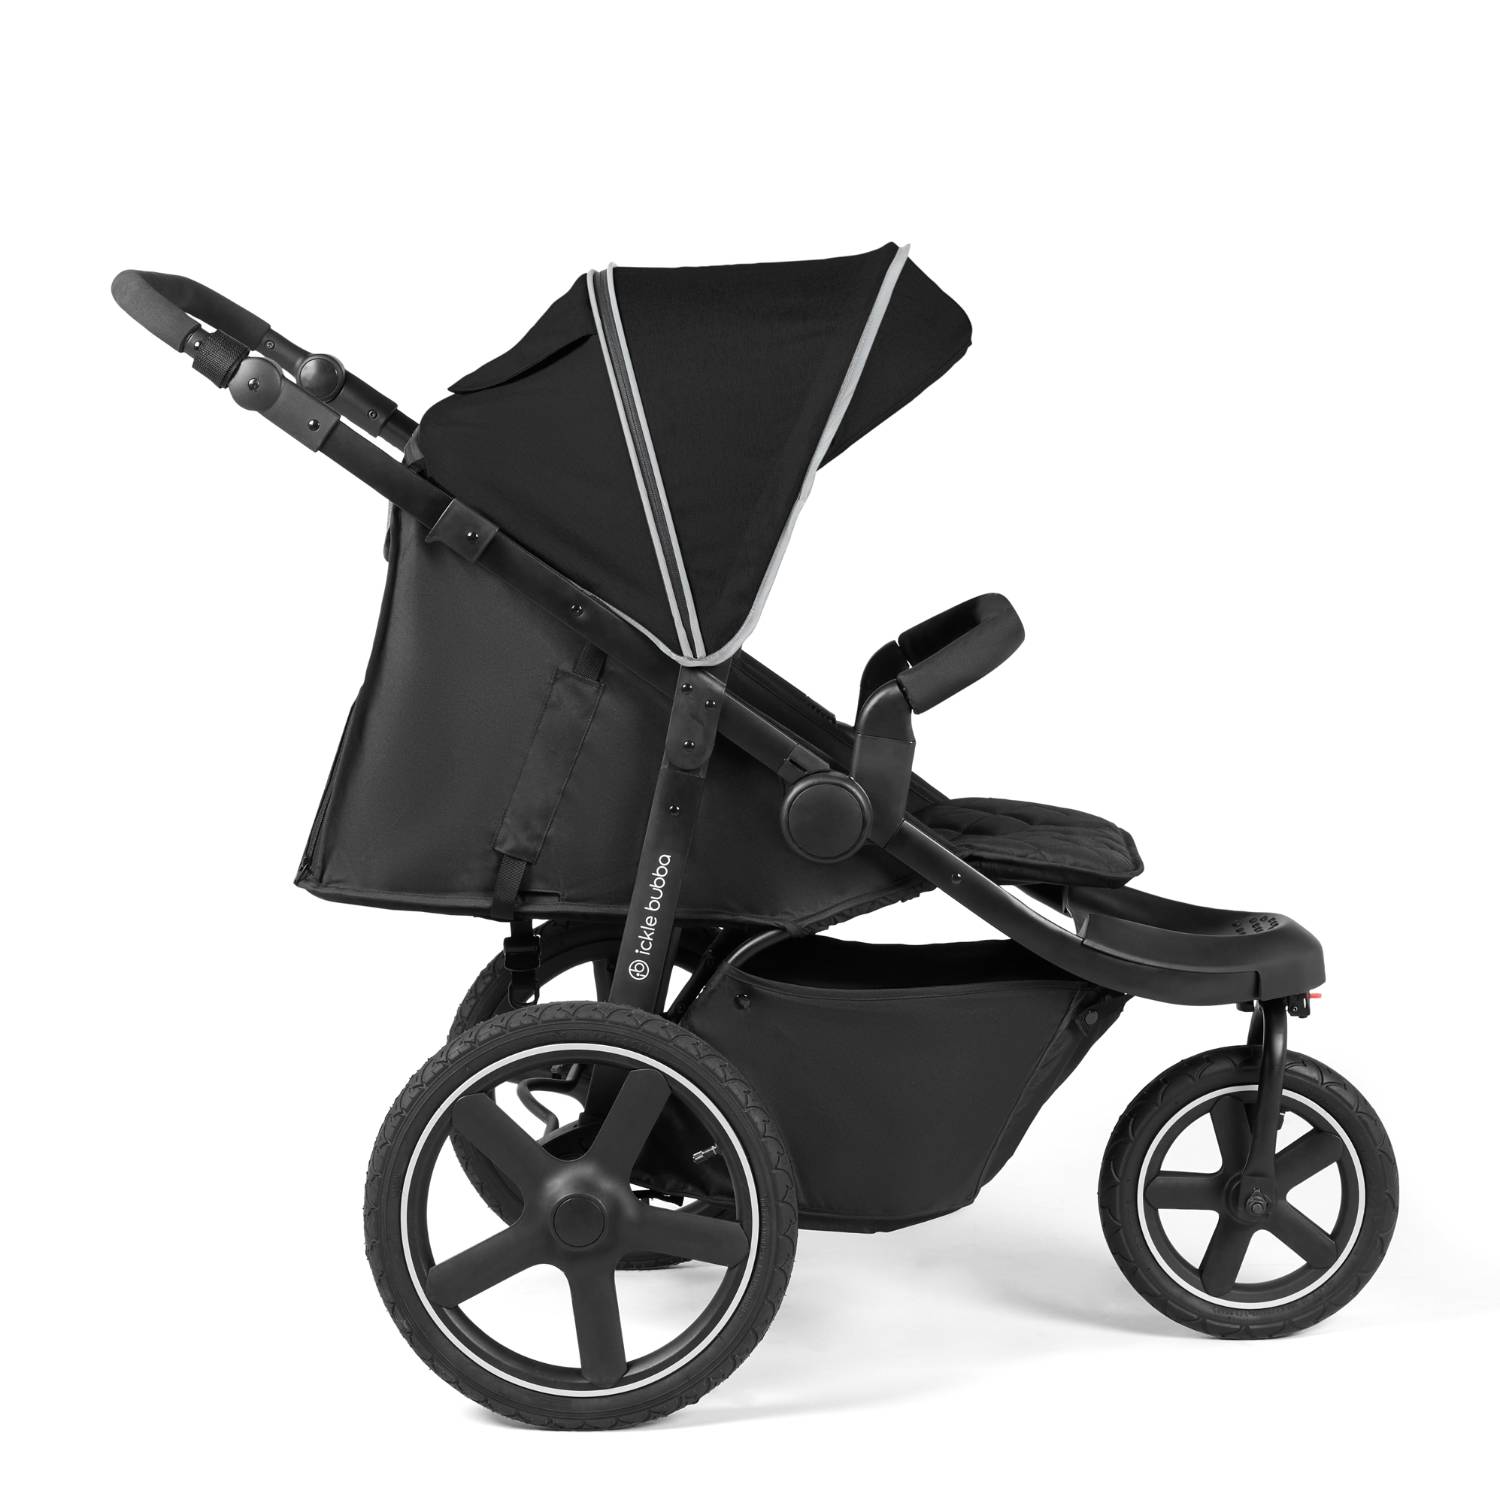 Ickle Bubba Venus Max Jogger Stroller in Black colour with seat unit in reclined position